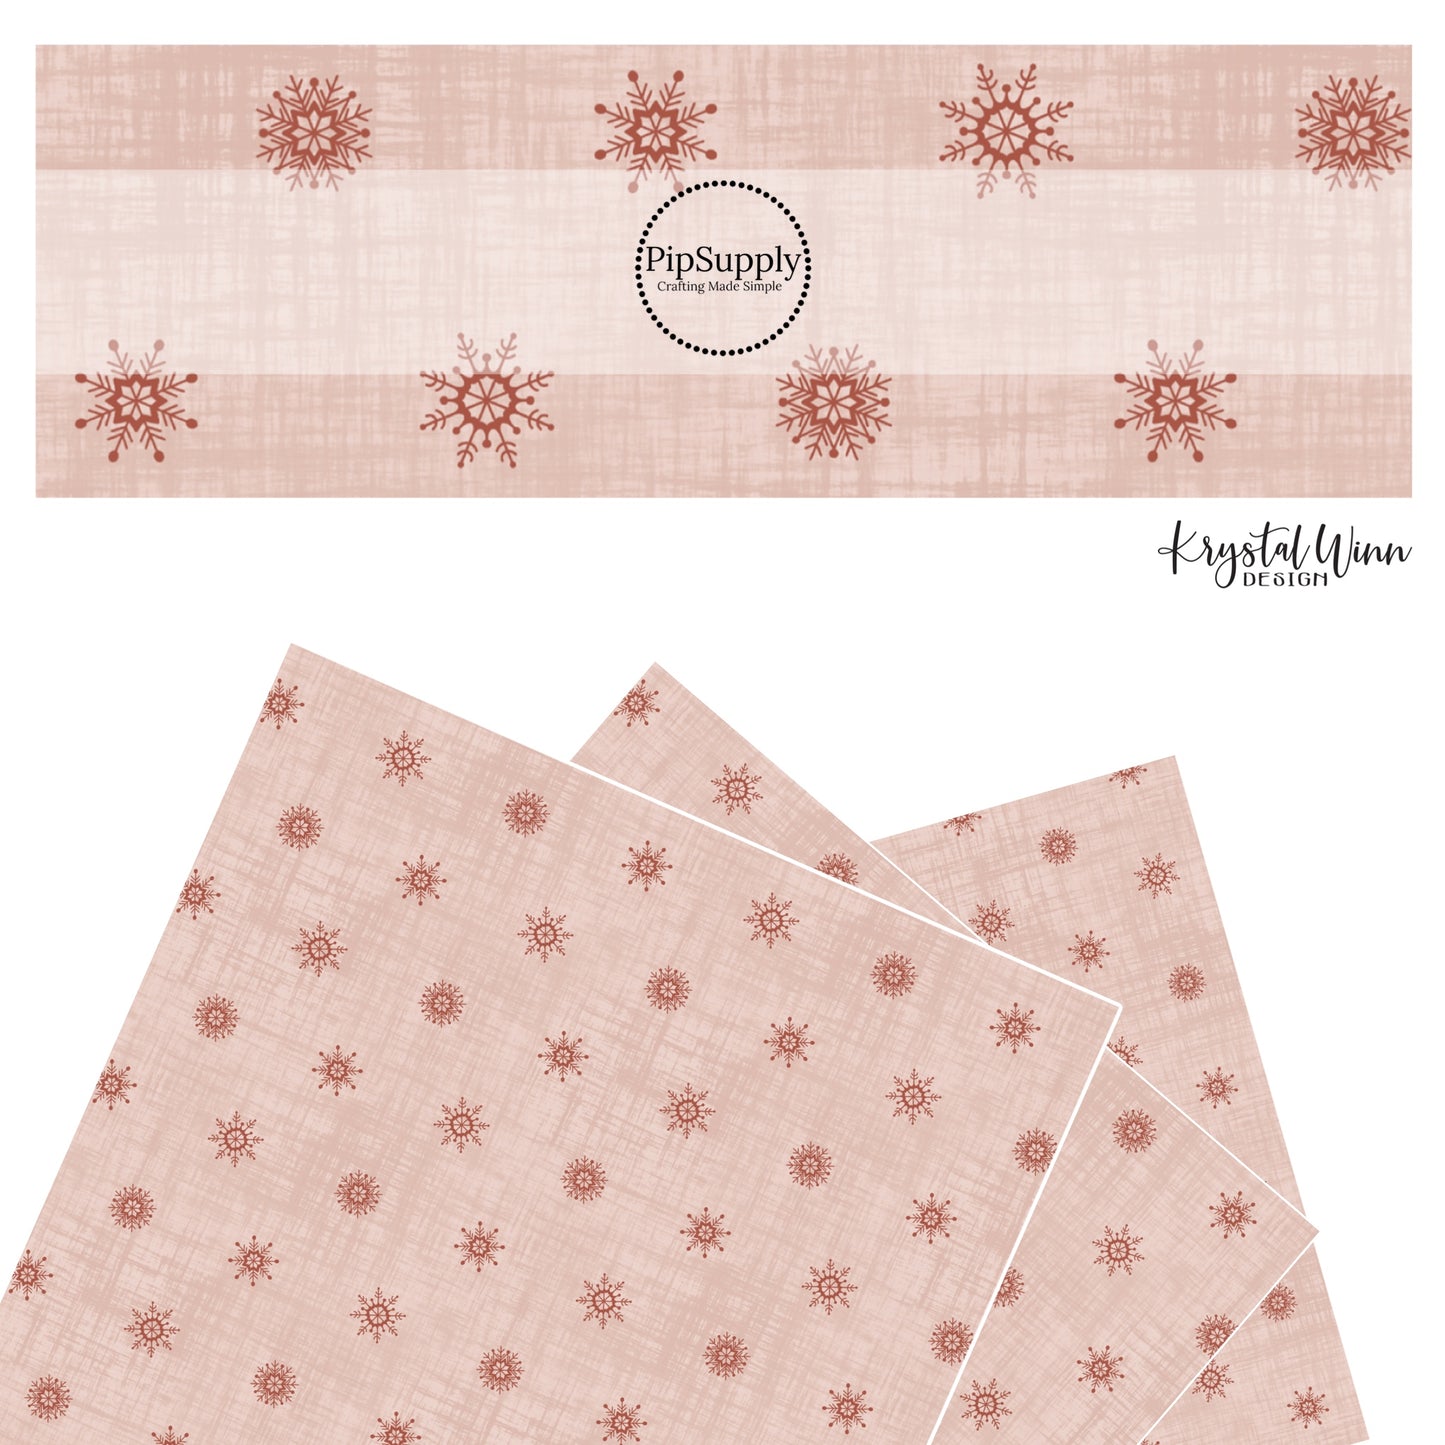 These holiday themed faux leather sheets contain the following design elements: Christmas red snowflakes on pink. Our CPSIA compliant faux leather sheets or rolls can be used for all types of crafting projects.